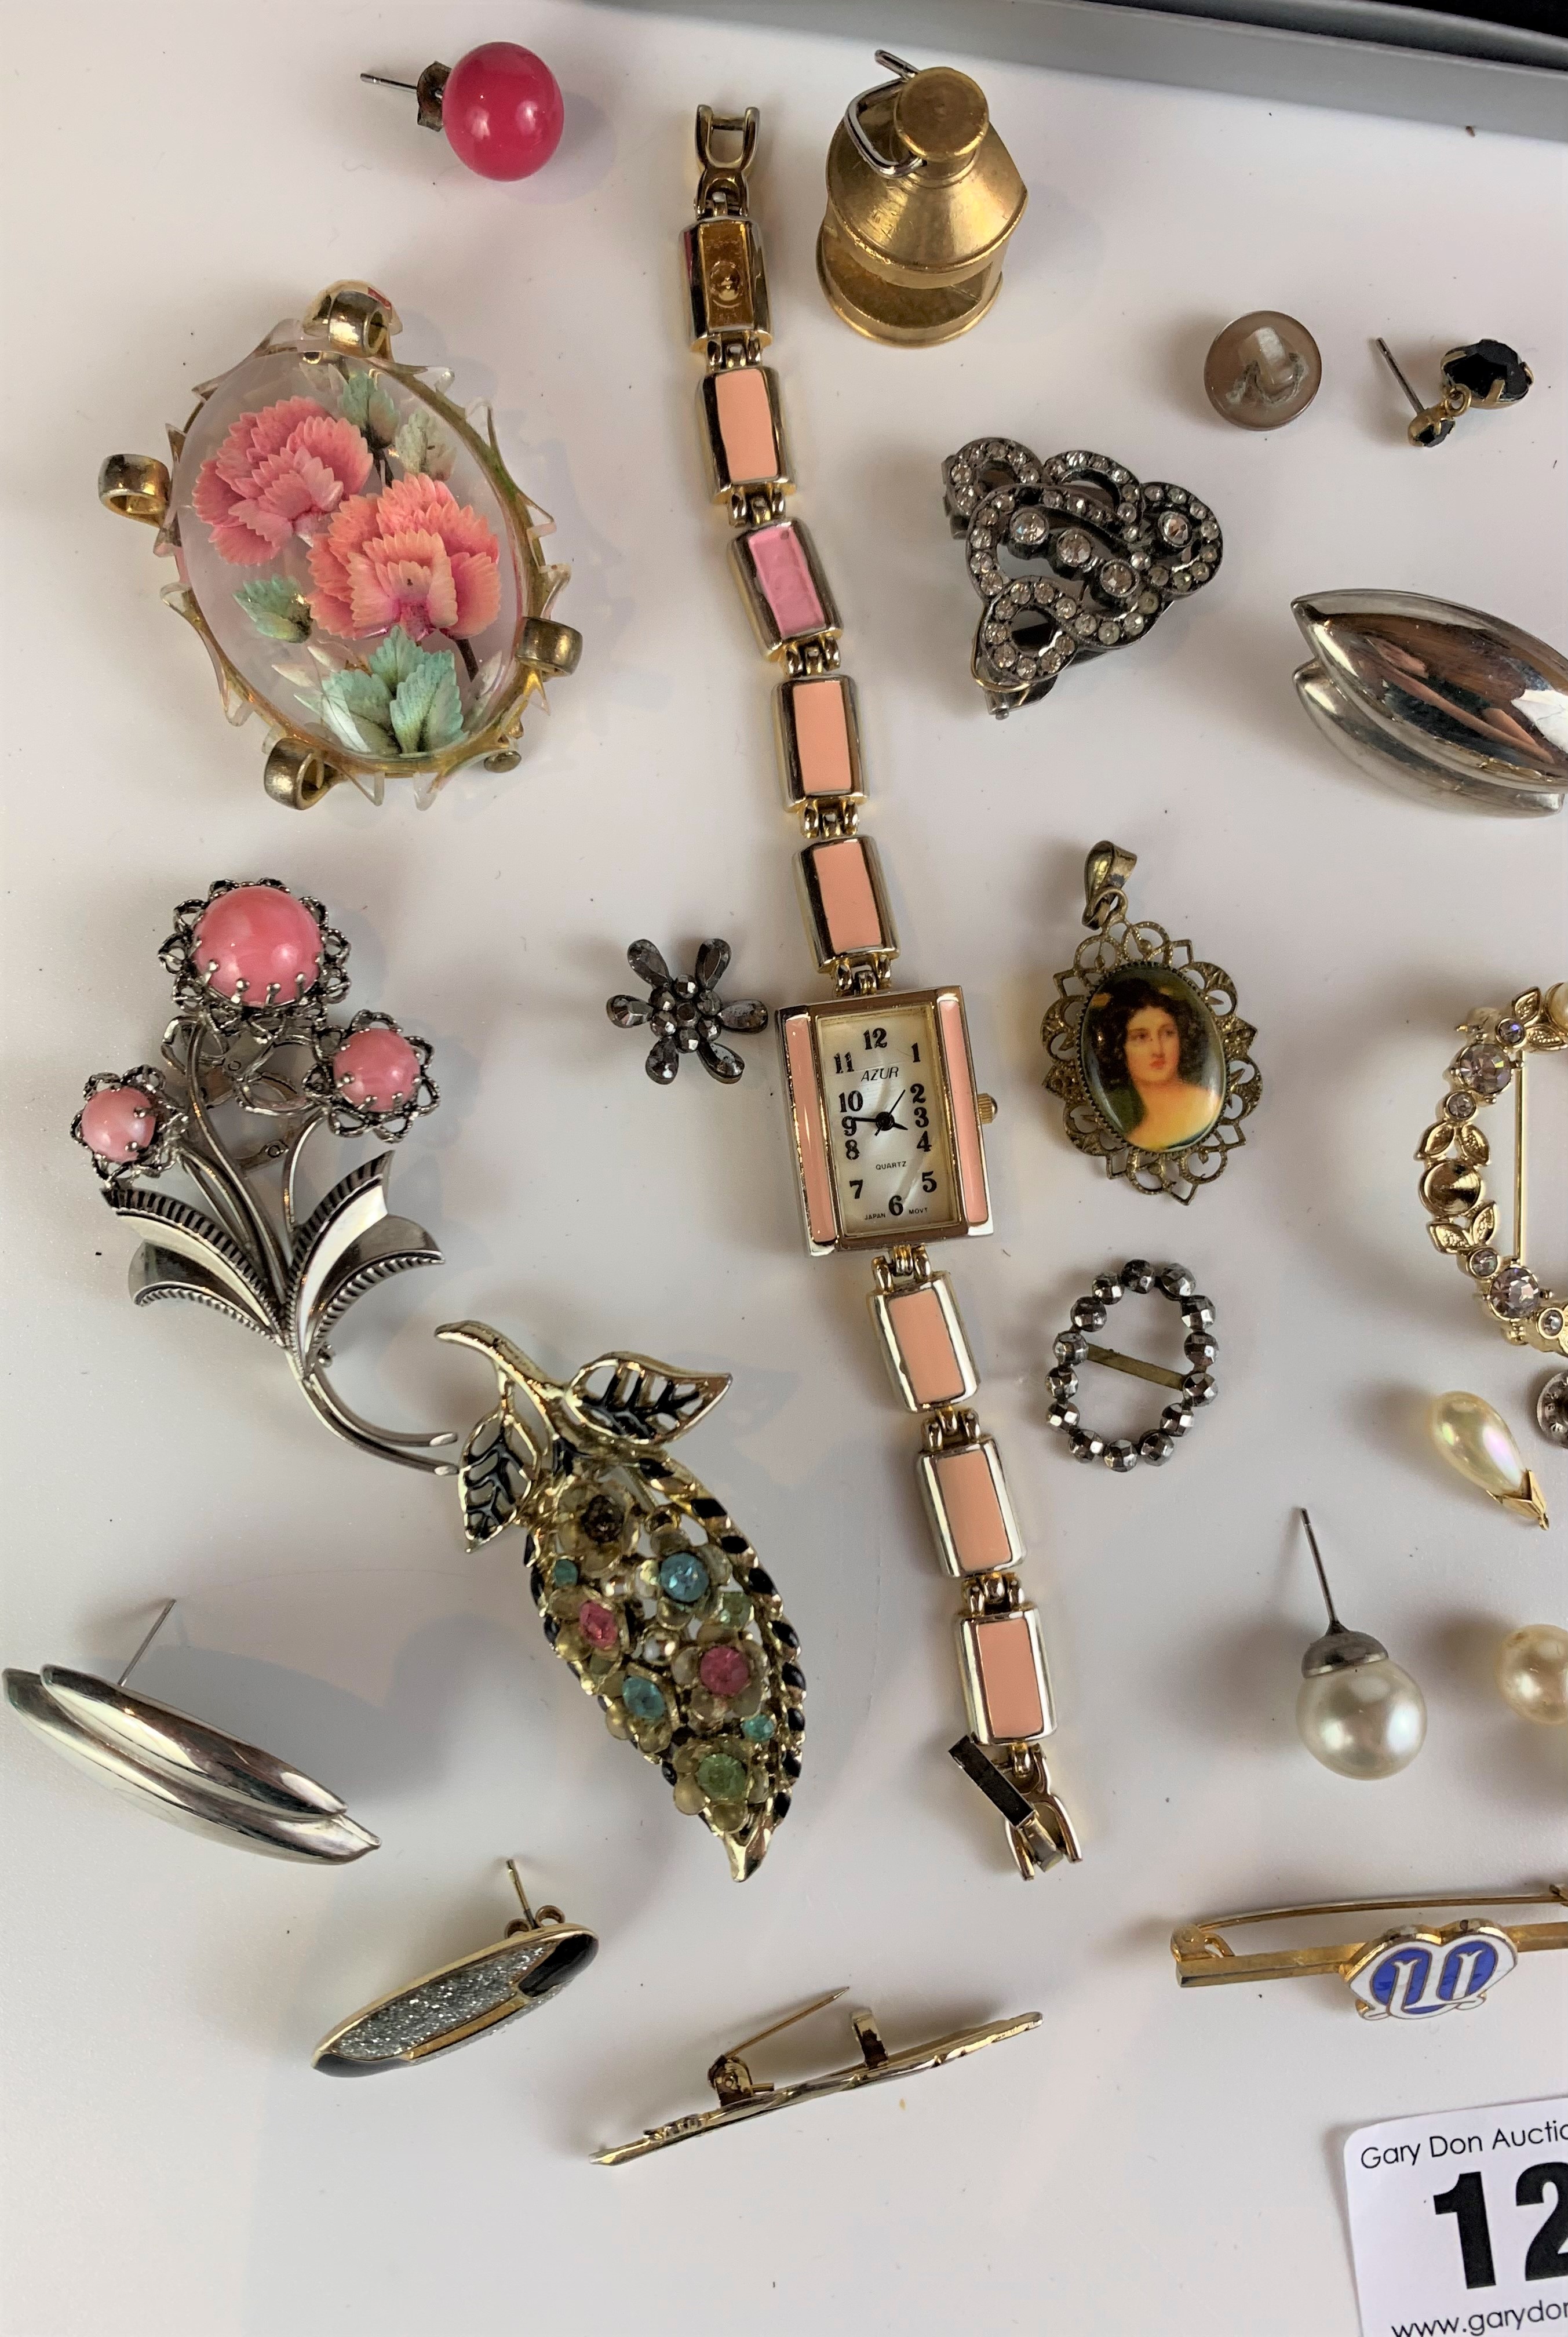 Dress jewellery including brooches, earrings, rings, souvenir spoon, odd coins and Azur watch - Image 2 of 9